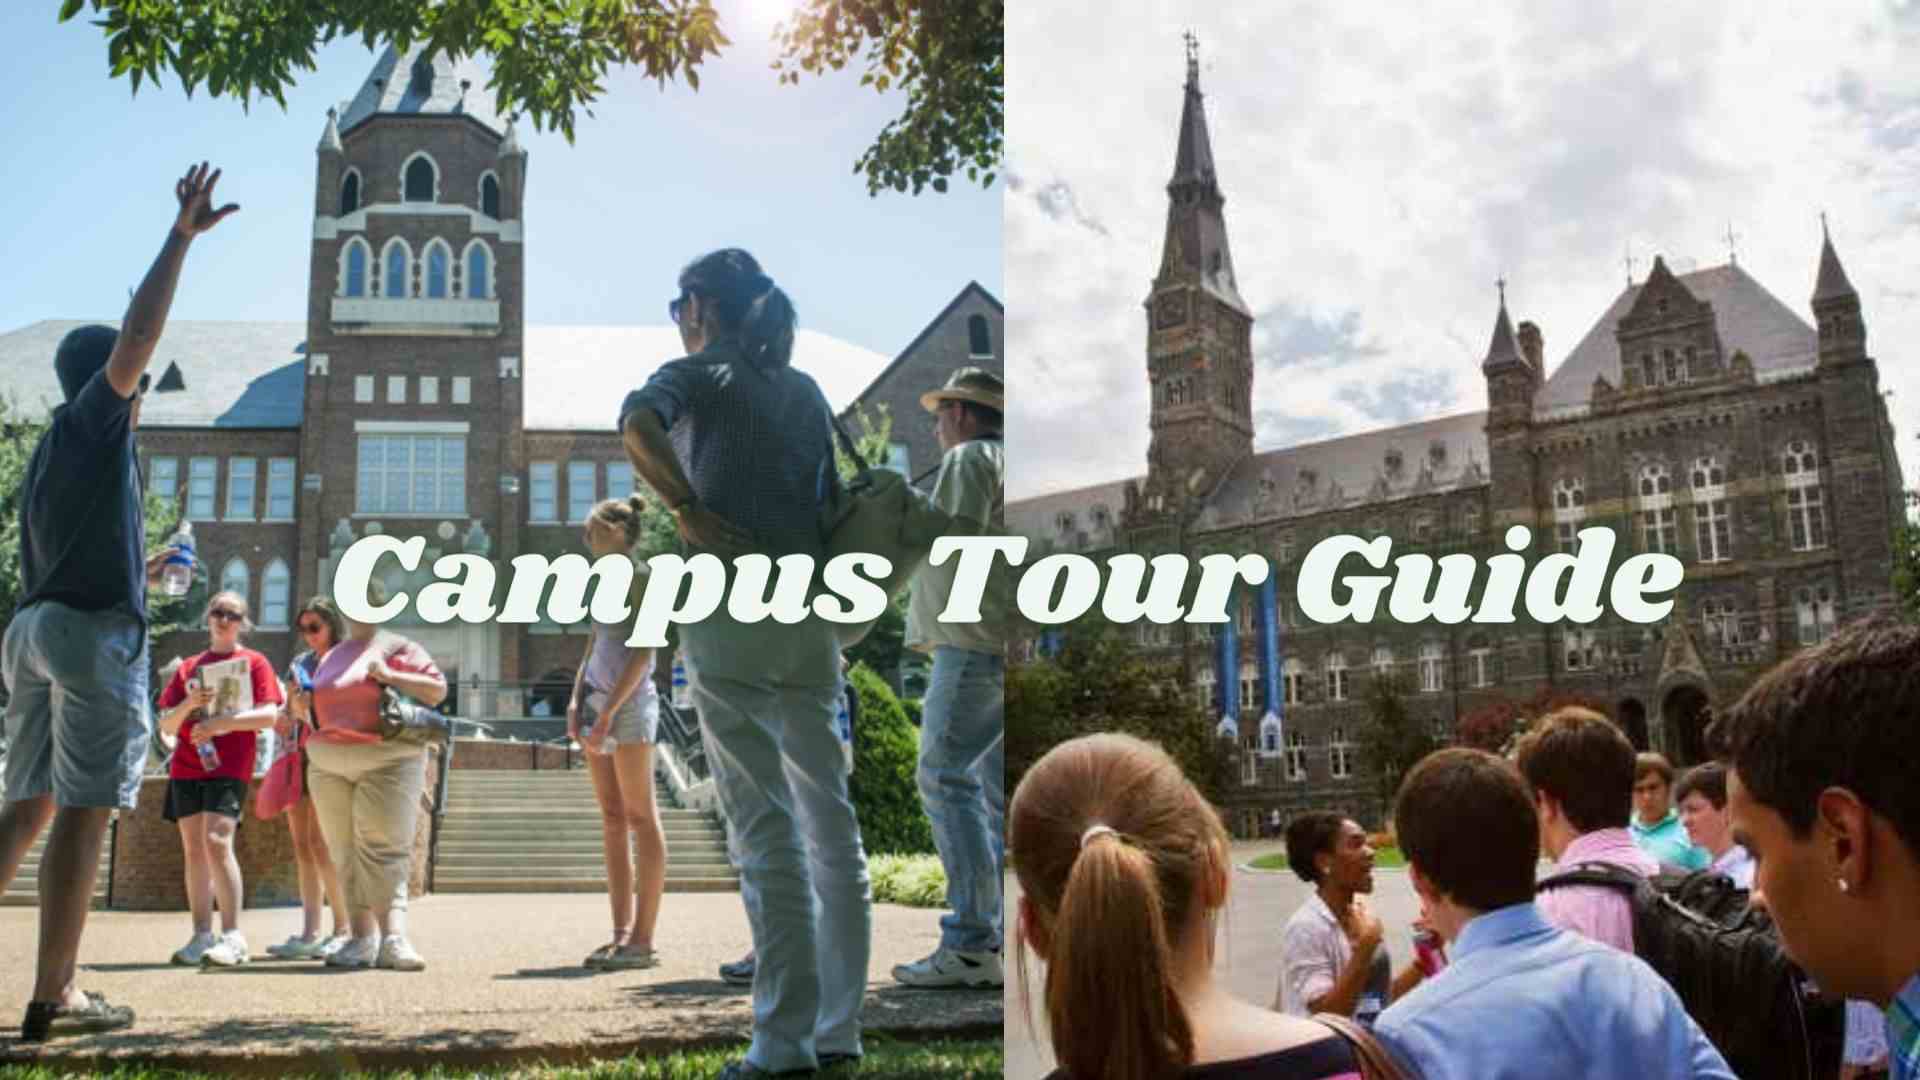 Campus Tour Guide wallpaper and images